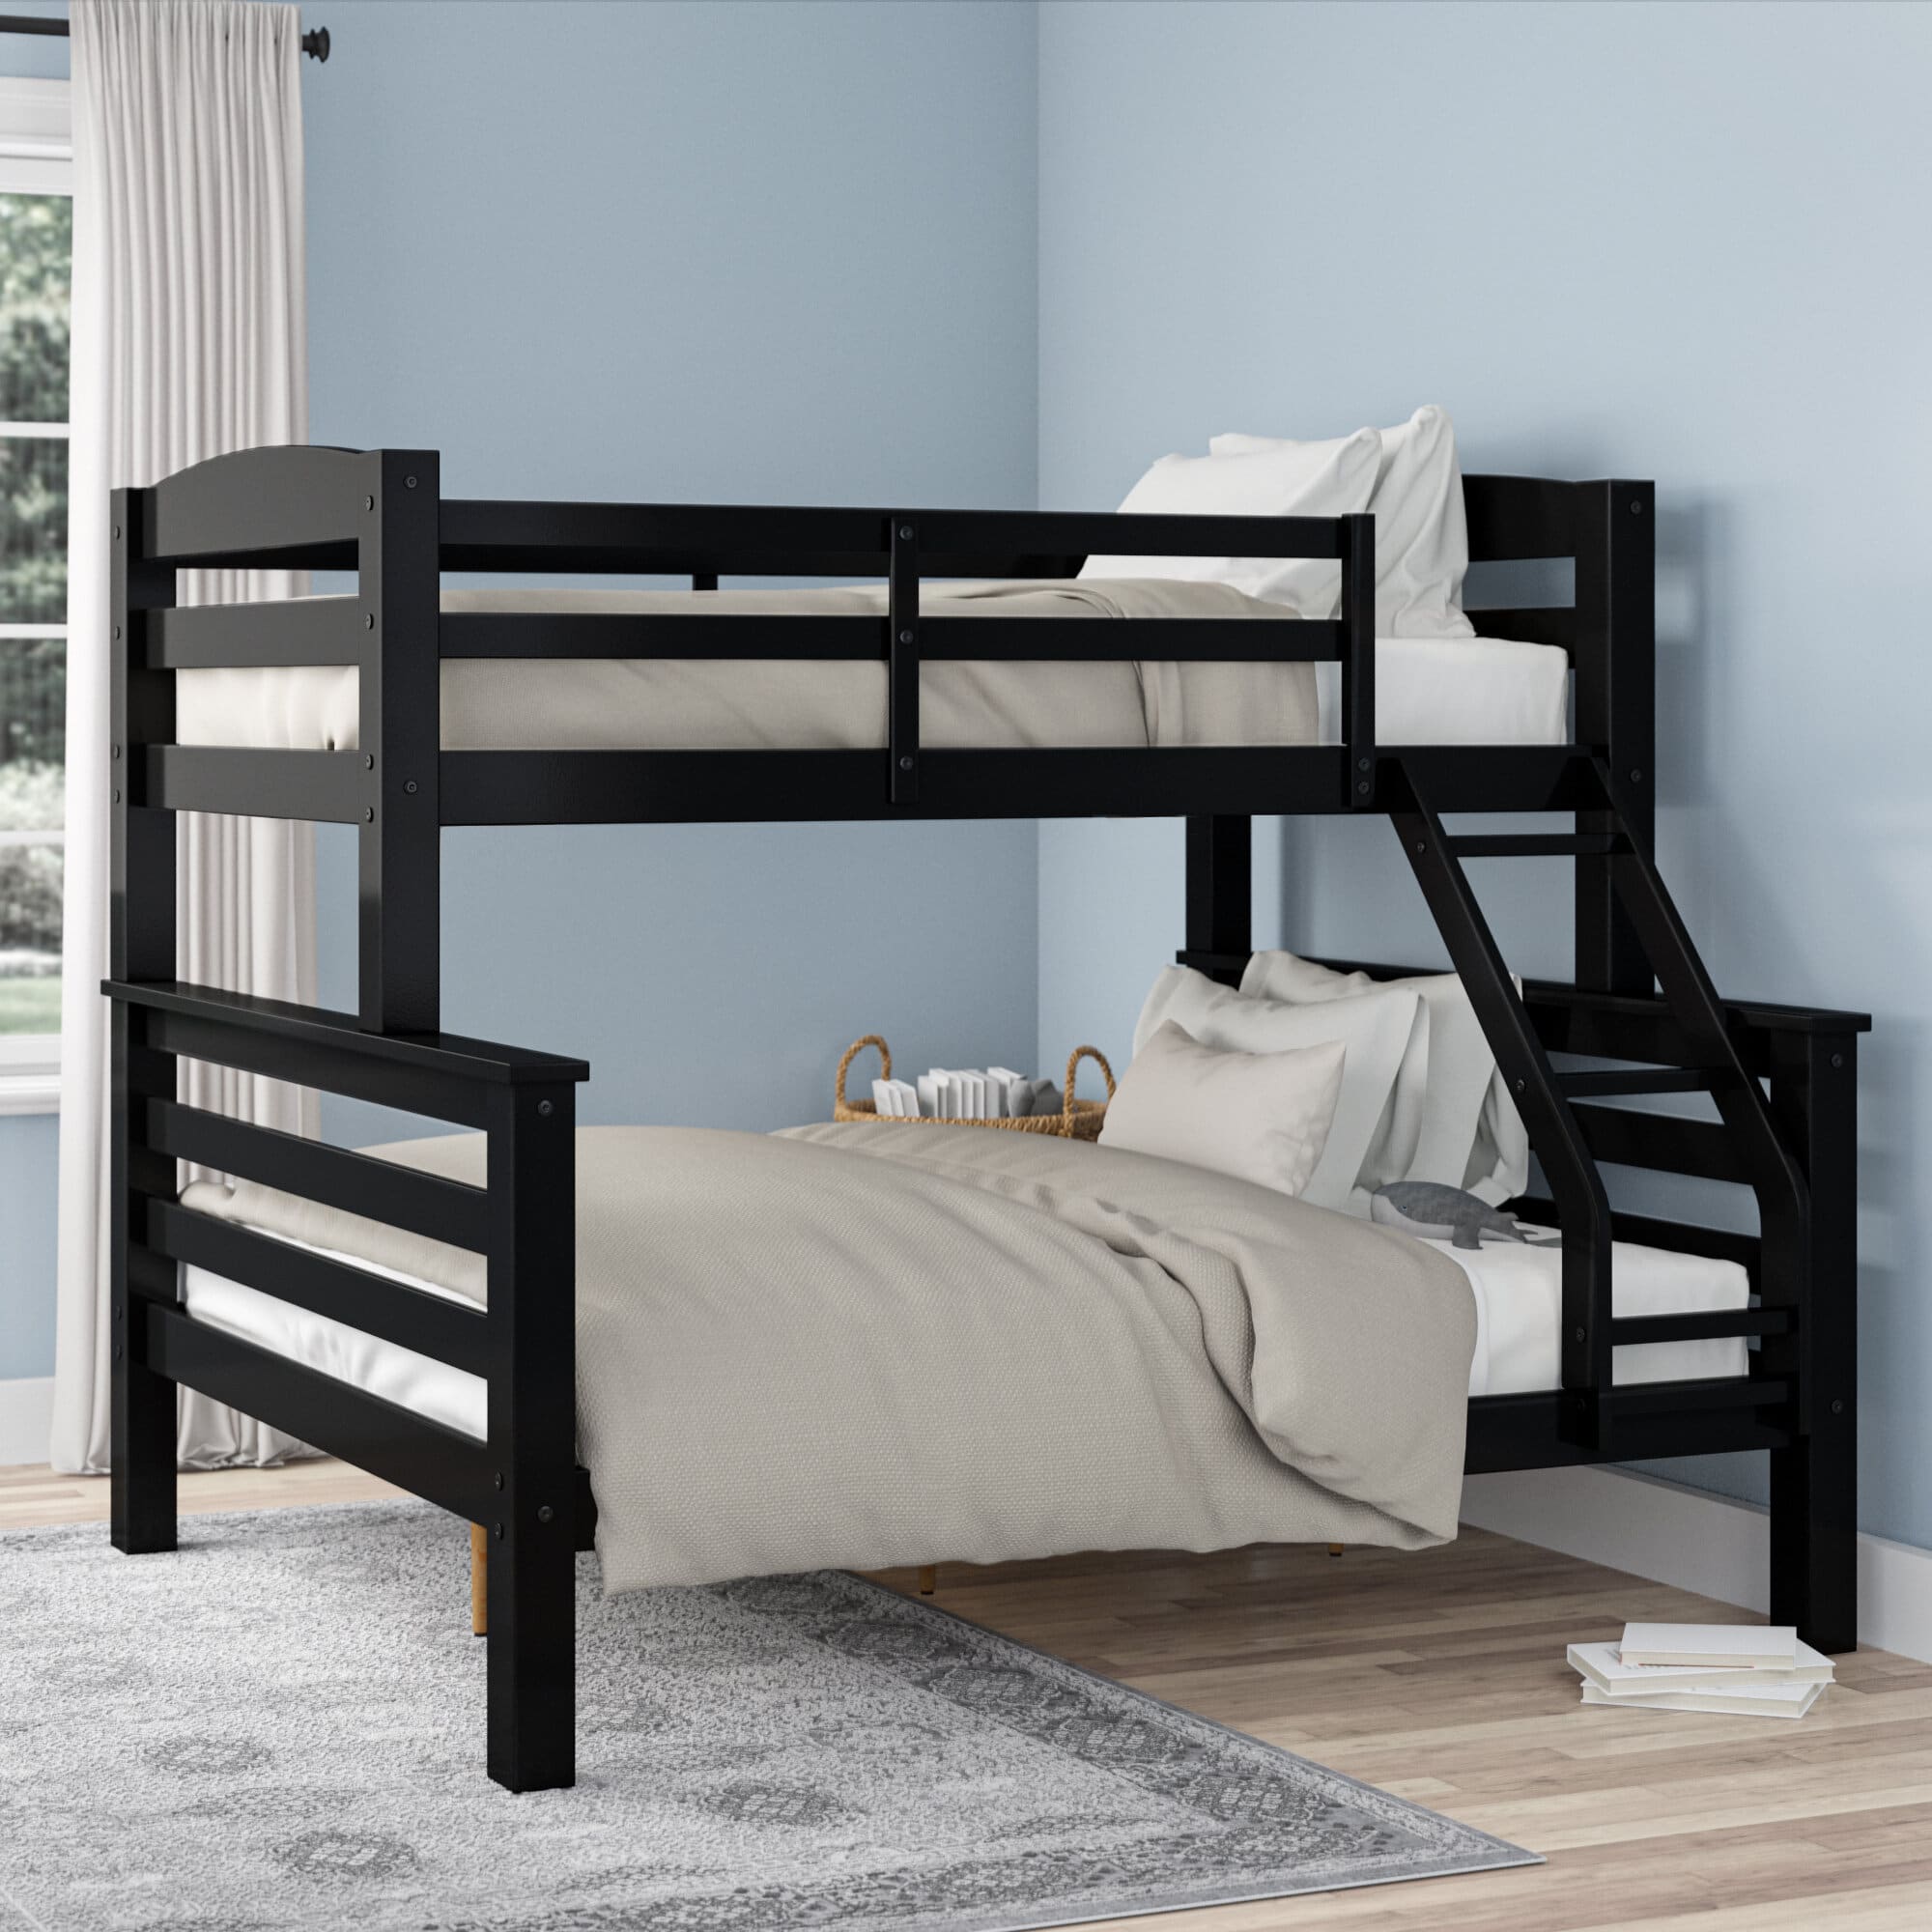 6 Best Twin Over Full Bunk Beds May, Twin And Full Bed